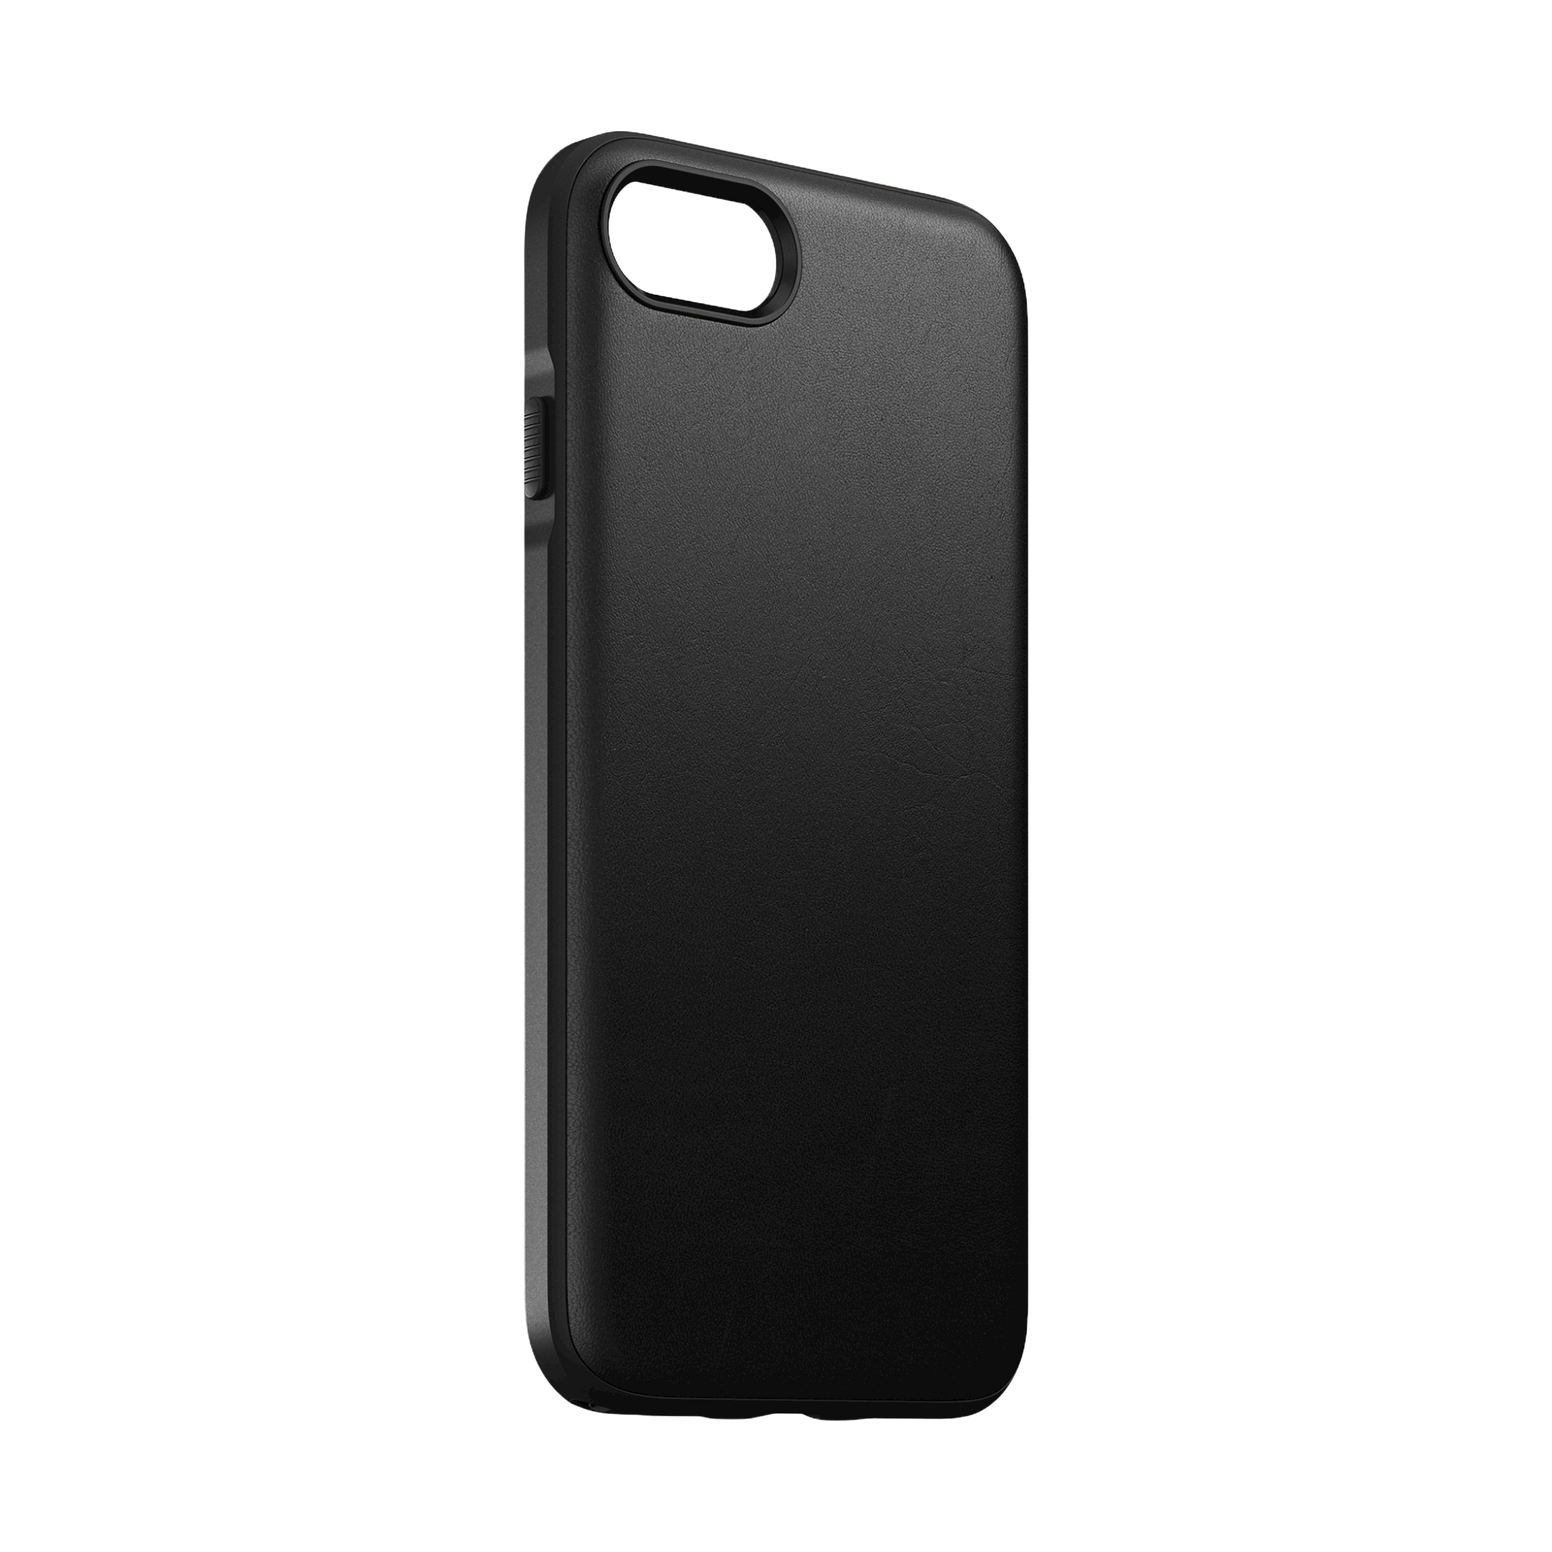 Nomad Modern Leather Case for iPhone SE - Black - Discontinued